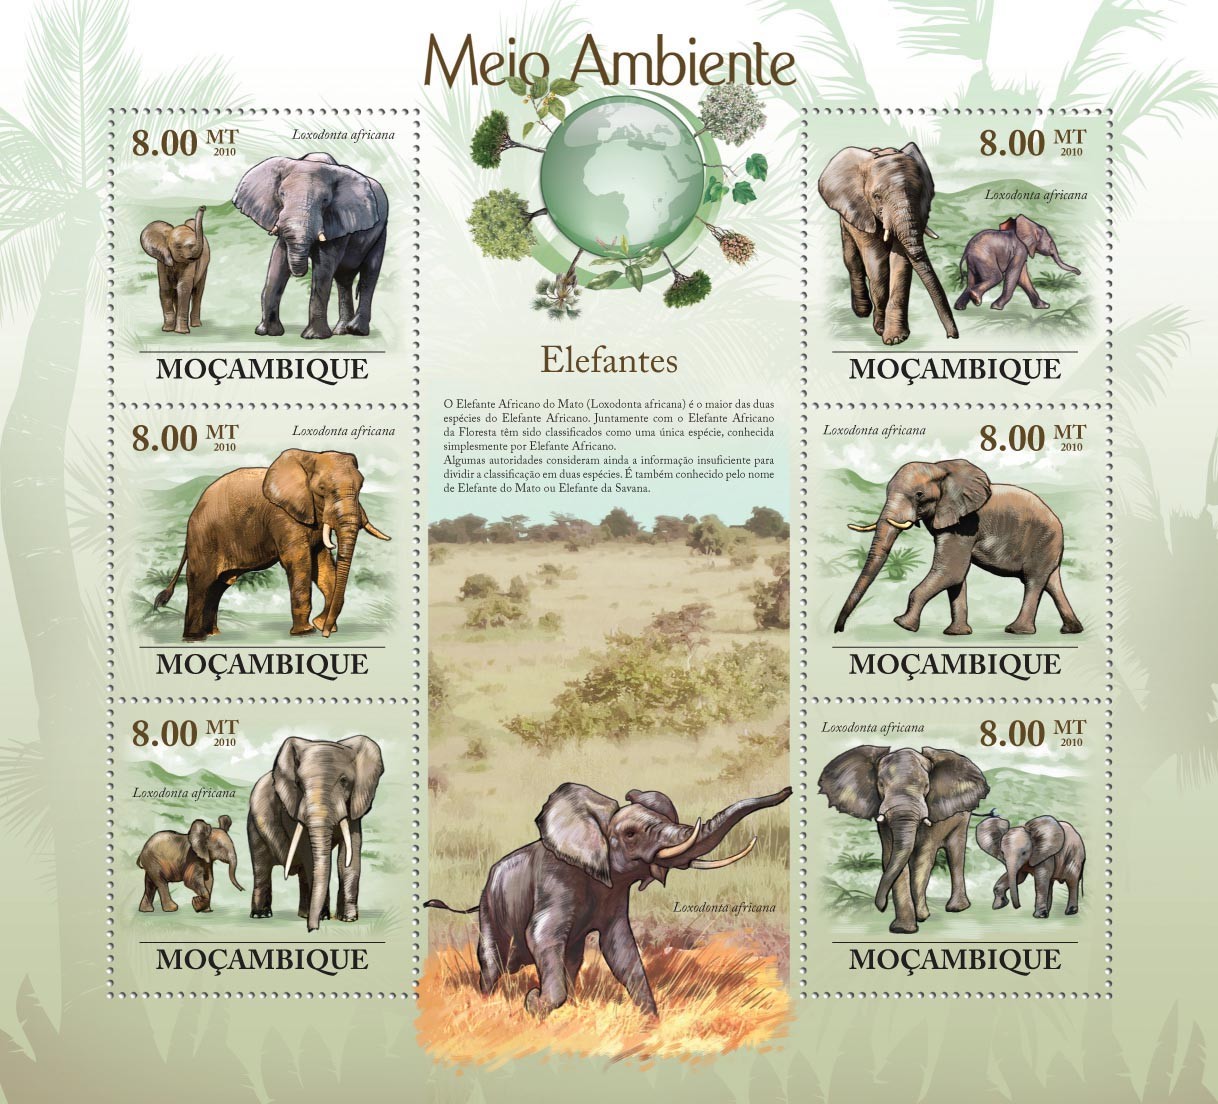 Elephants ( Loxodonta Africana ) - Issue of Mozambique postage Stamps